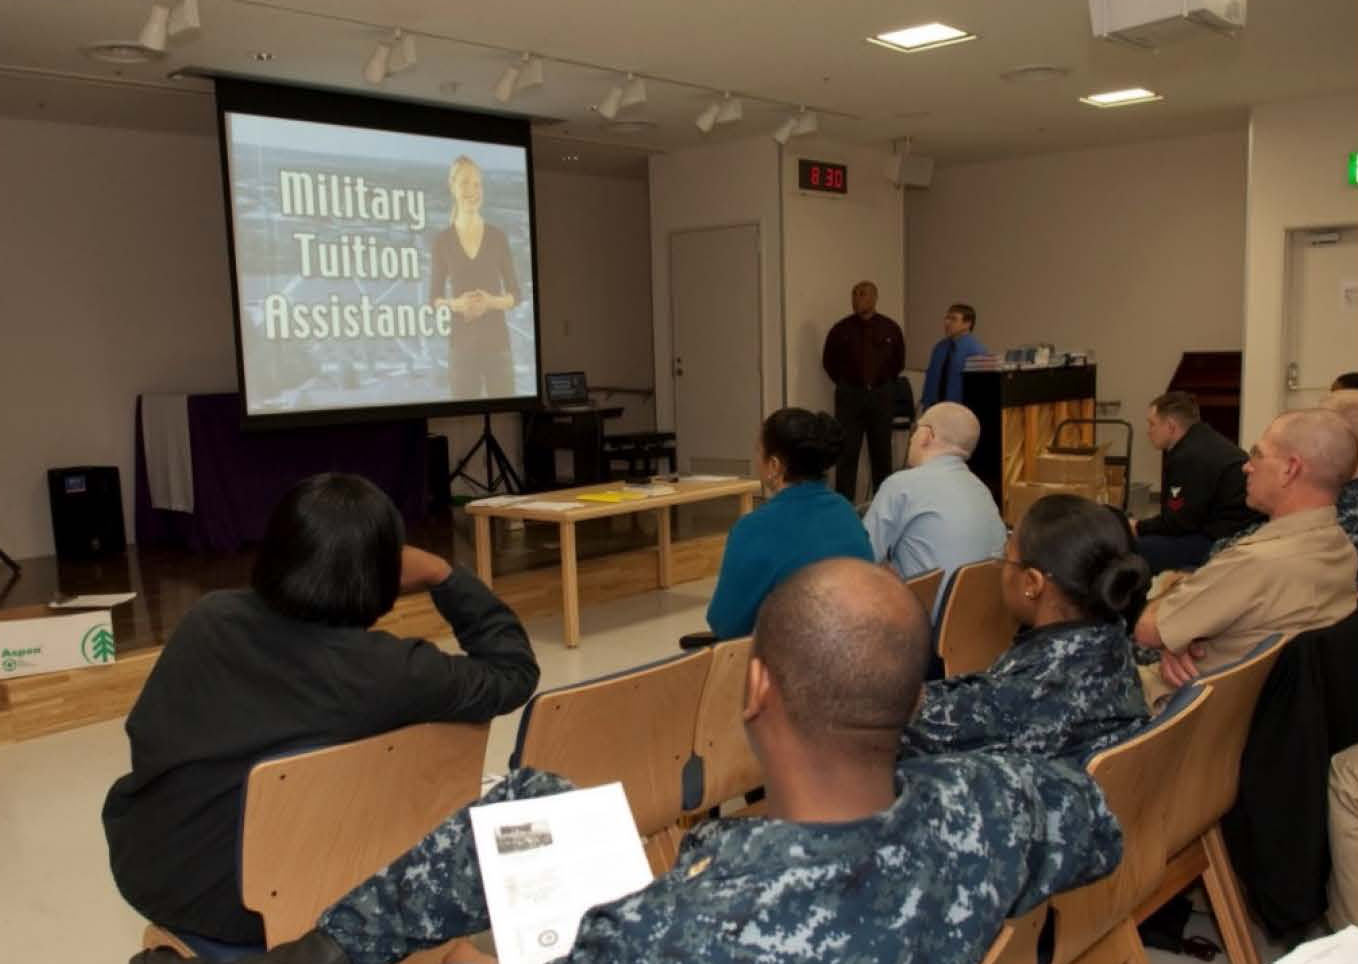 Soldiers attending a Military Tuition Assistance session